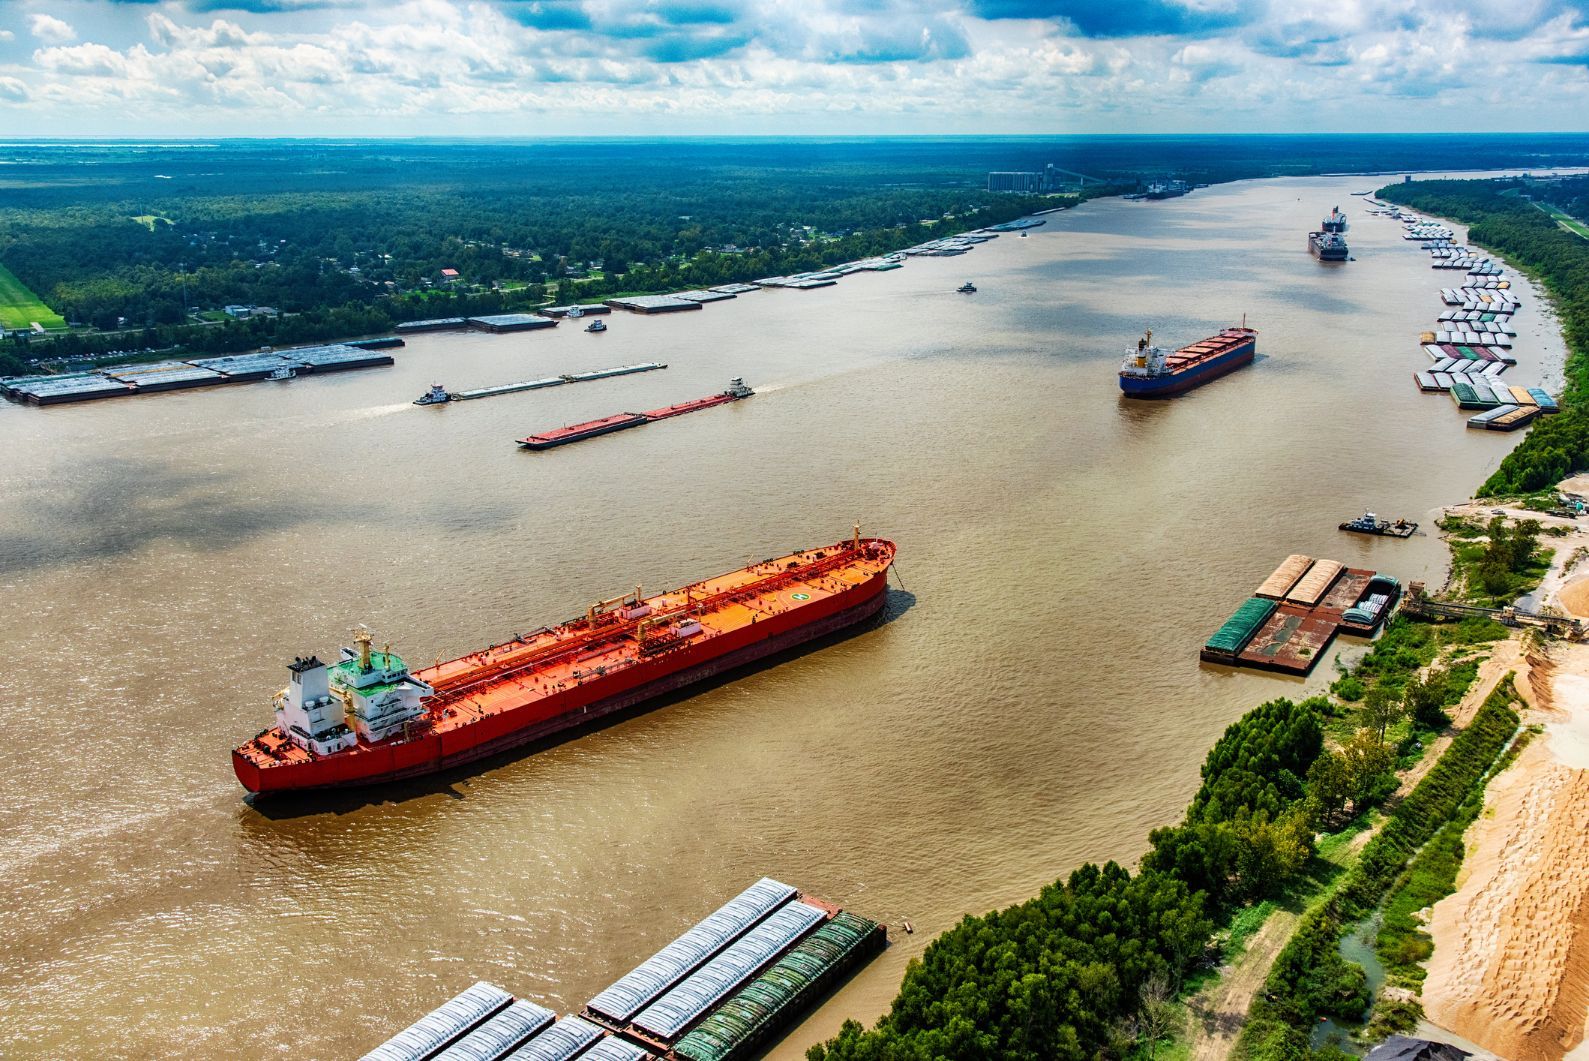 A stock photo, not from Ian's trip, but showing the sort of terrain, barges, tankers and containers that line the Mississippi. This particular stretch is just north of New Orleans. Photo: Getty